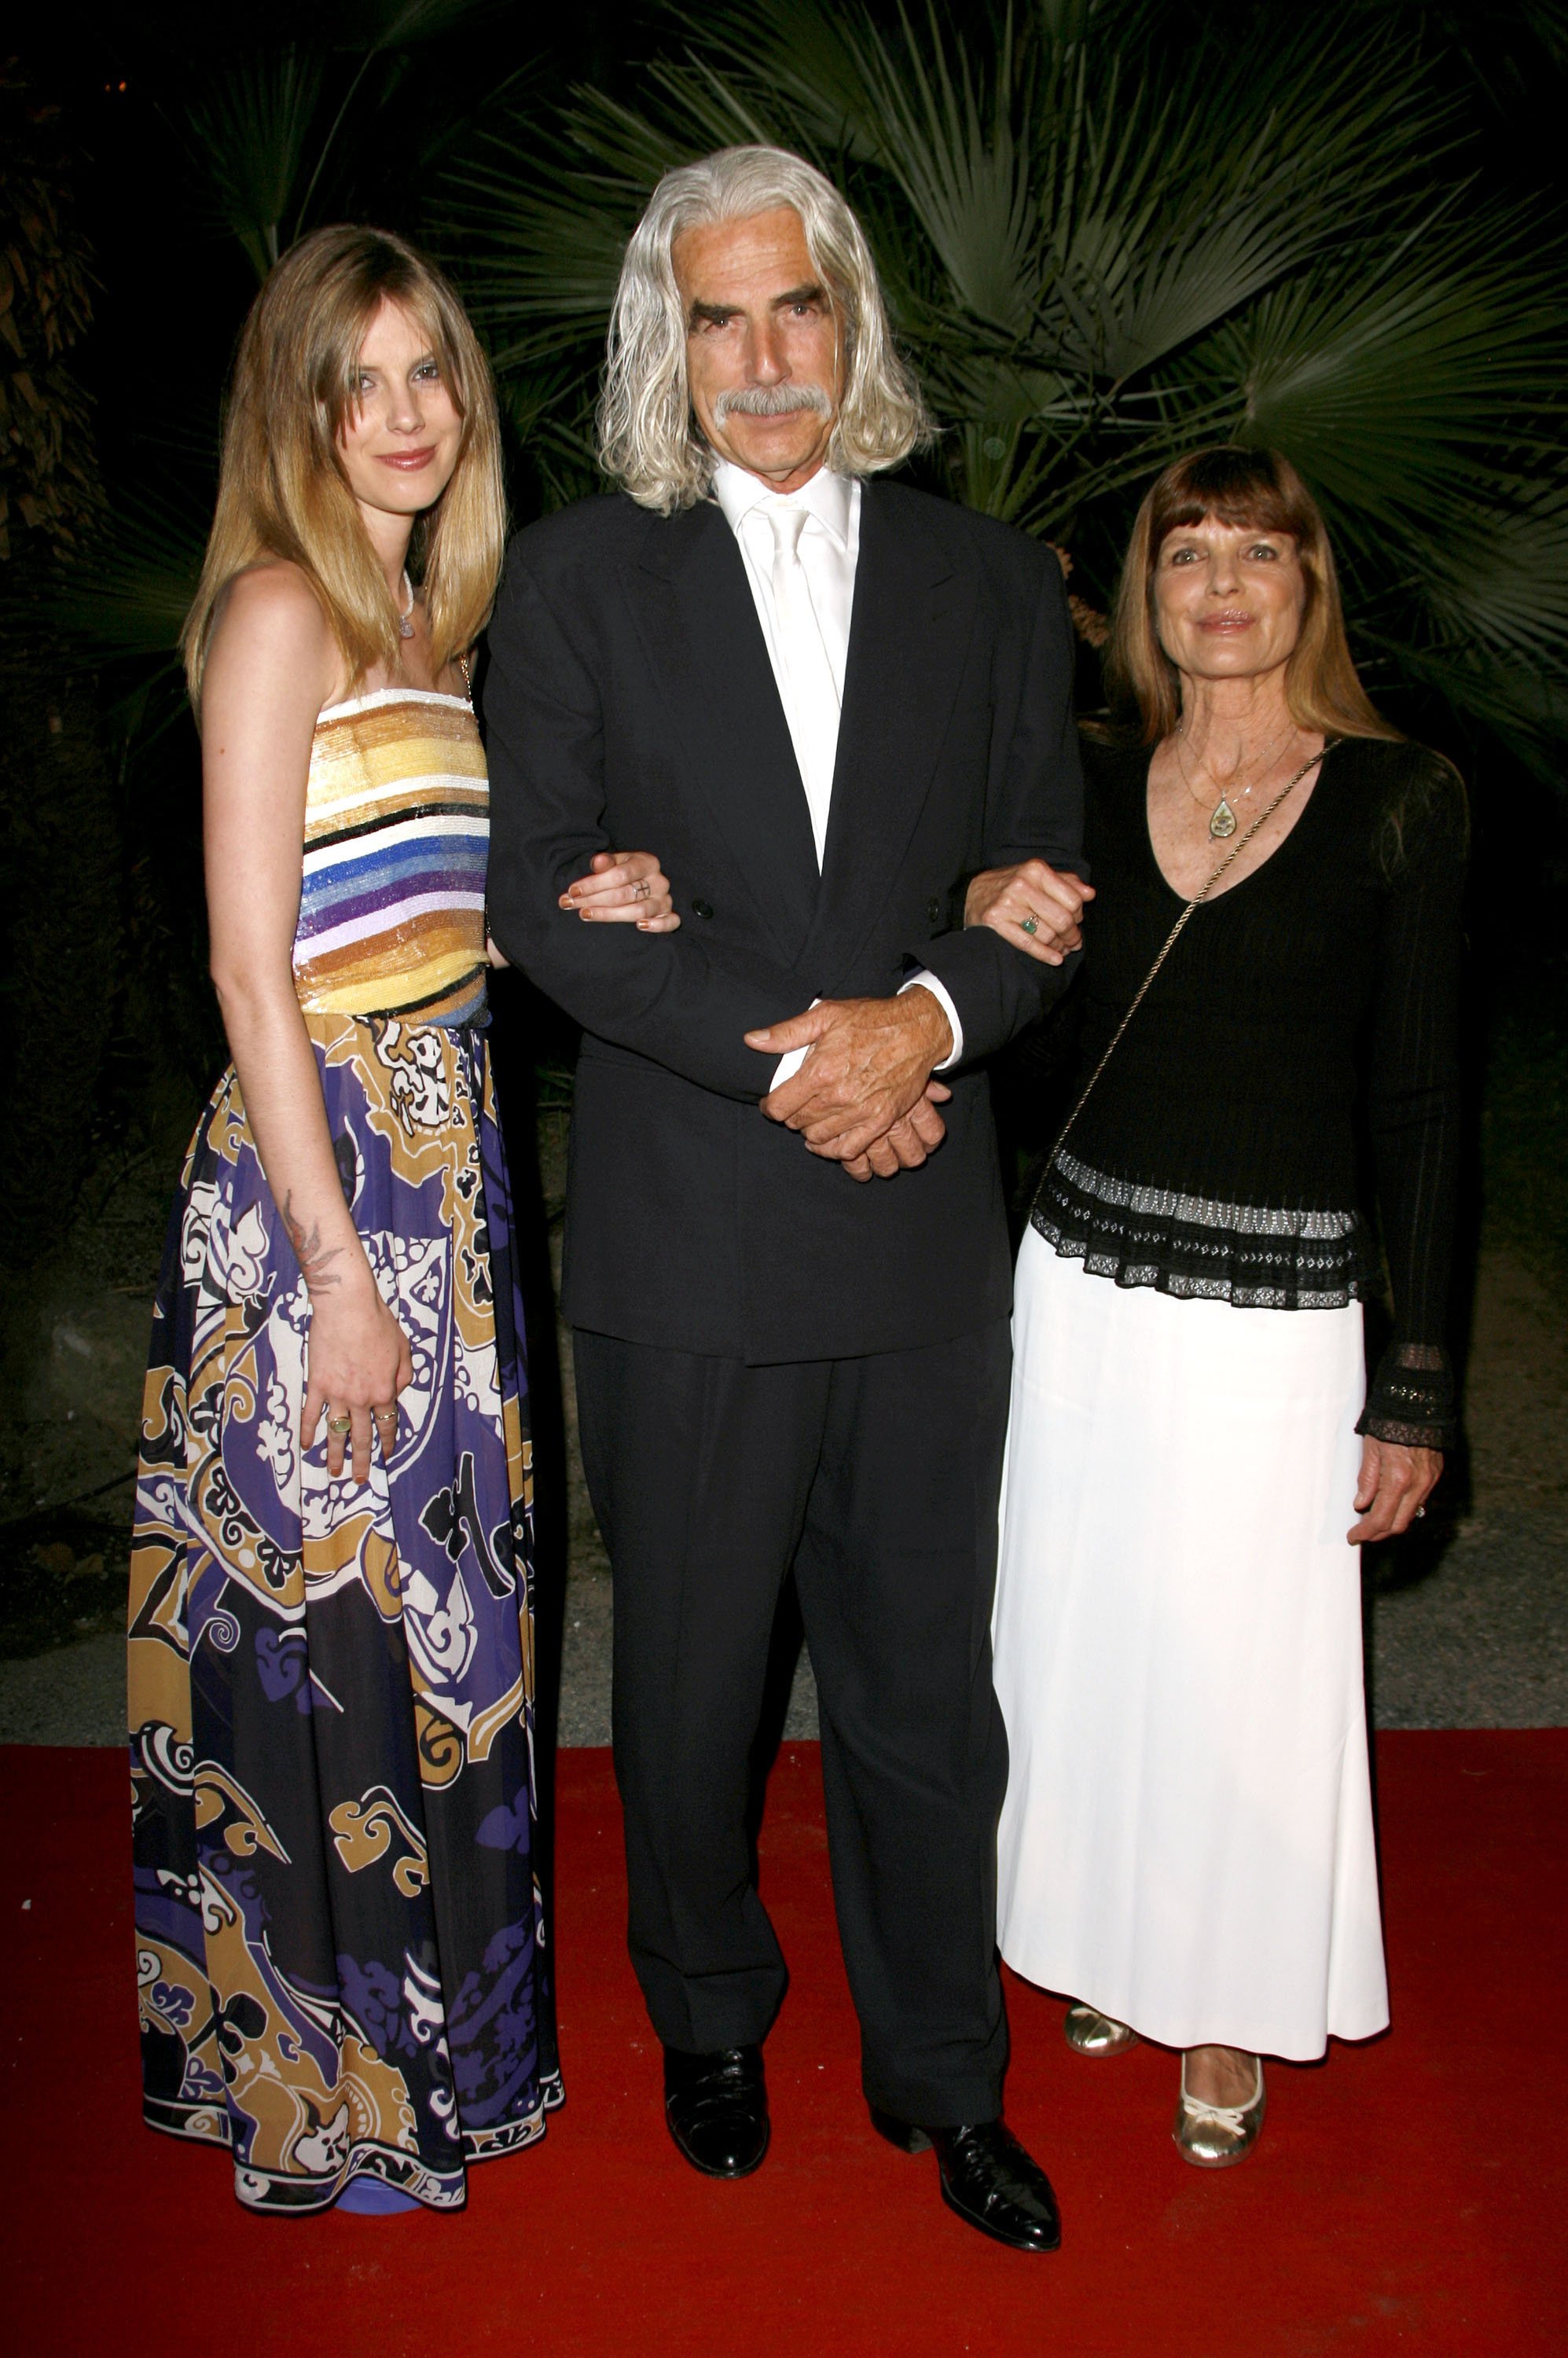 Cleo Rose Elliott, Sam Elliot, and Katherine Ross during the 2007 Cannes Film Festival - New Line 40th Anniversary "Golden Compass" Party in Cannes, France. | Source: Getty Images